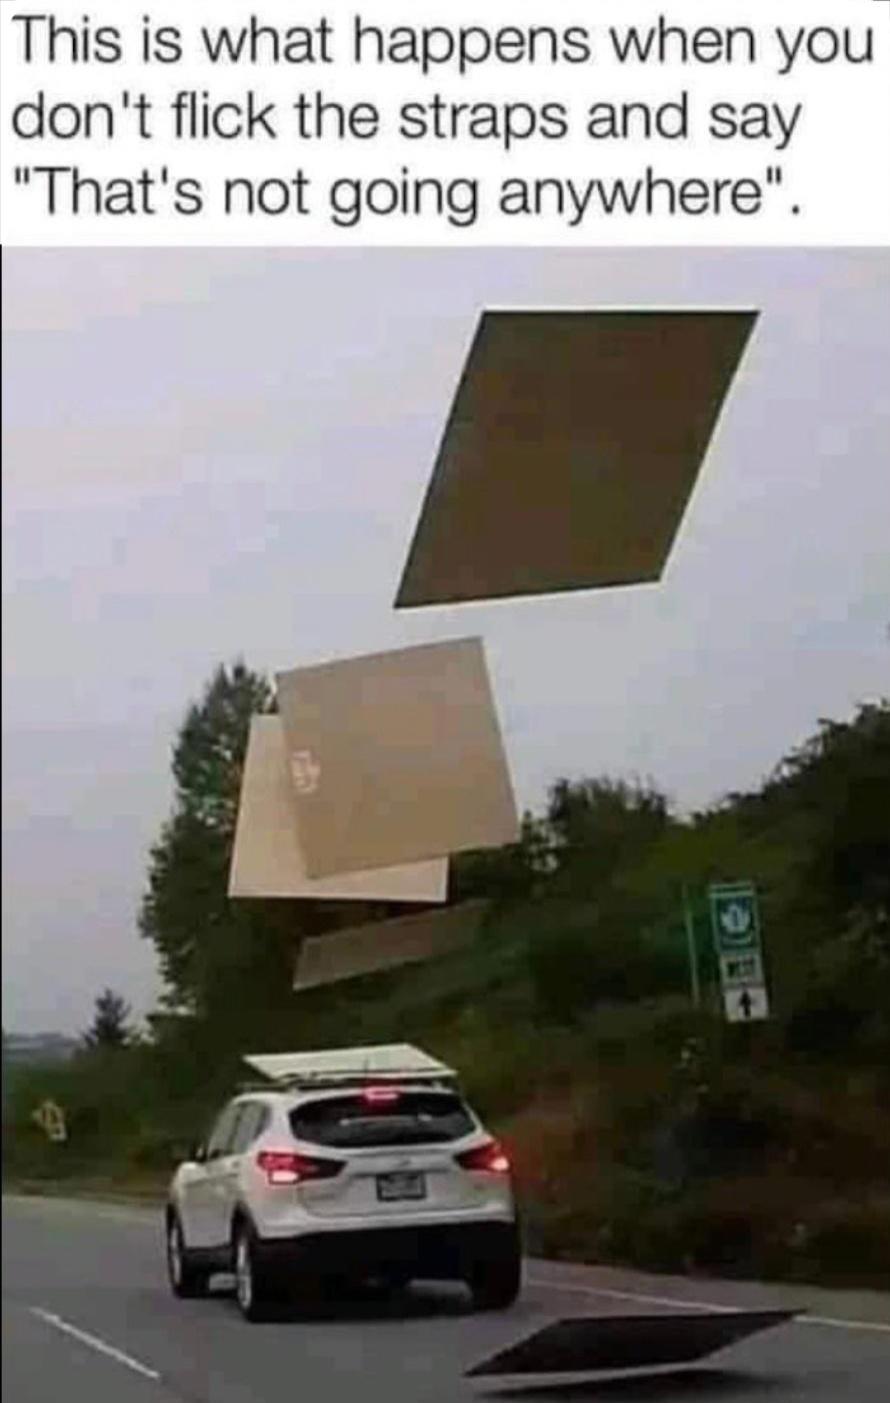 funny memes- road - This is what happens when you don't flick the straps and say "That's not going anywhere".